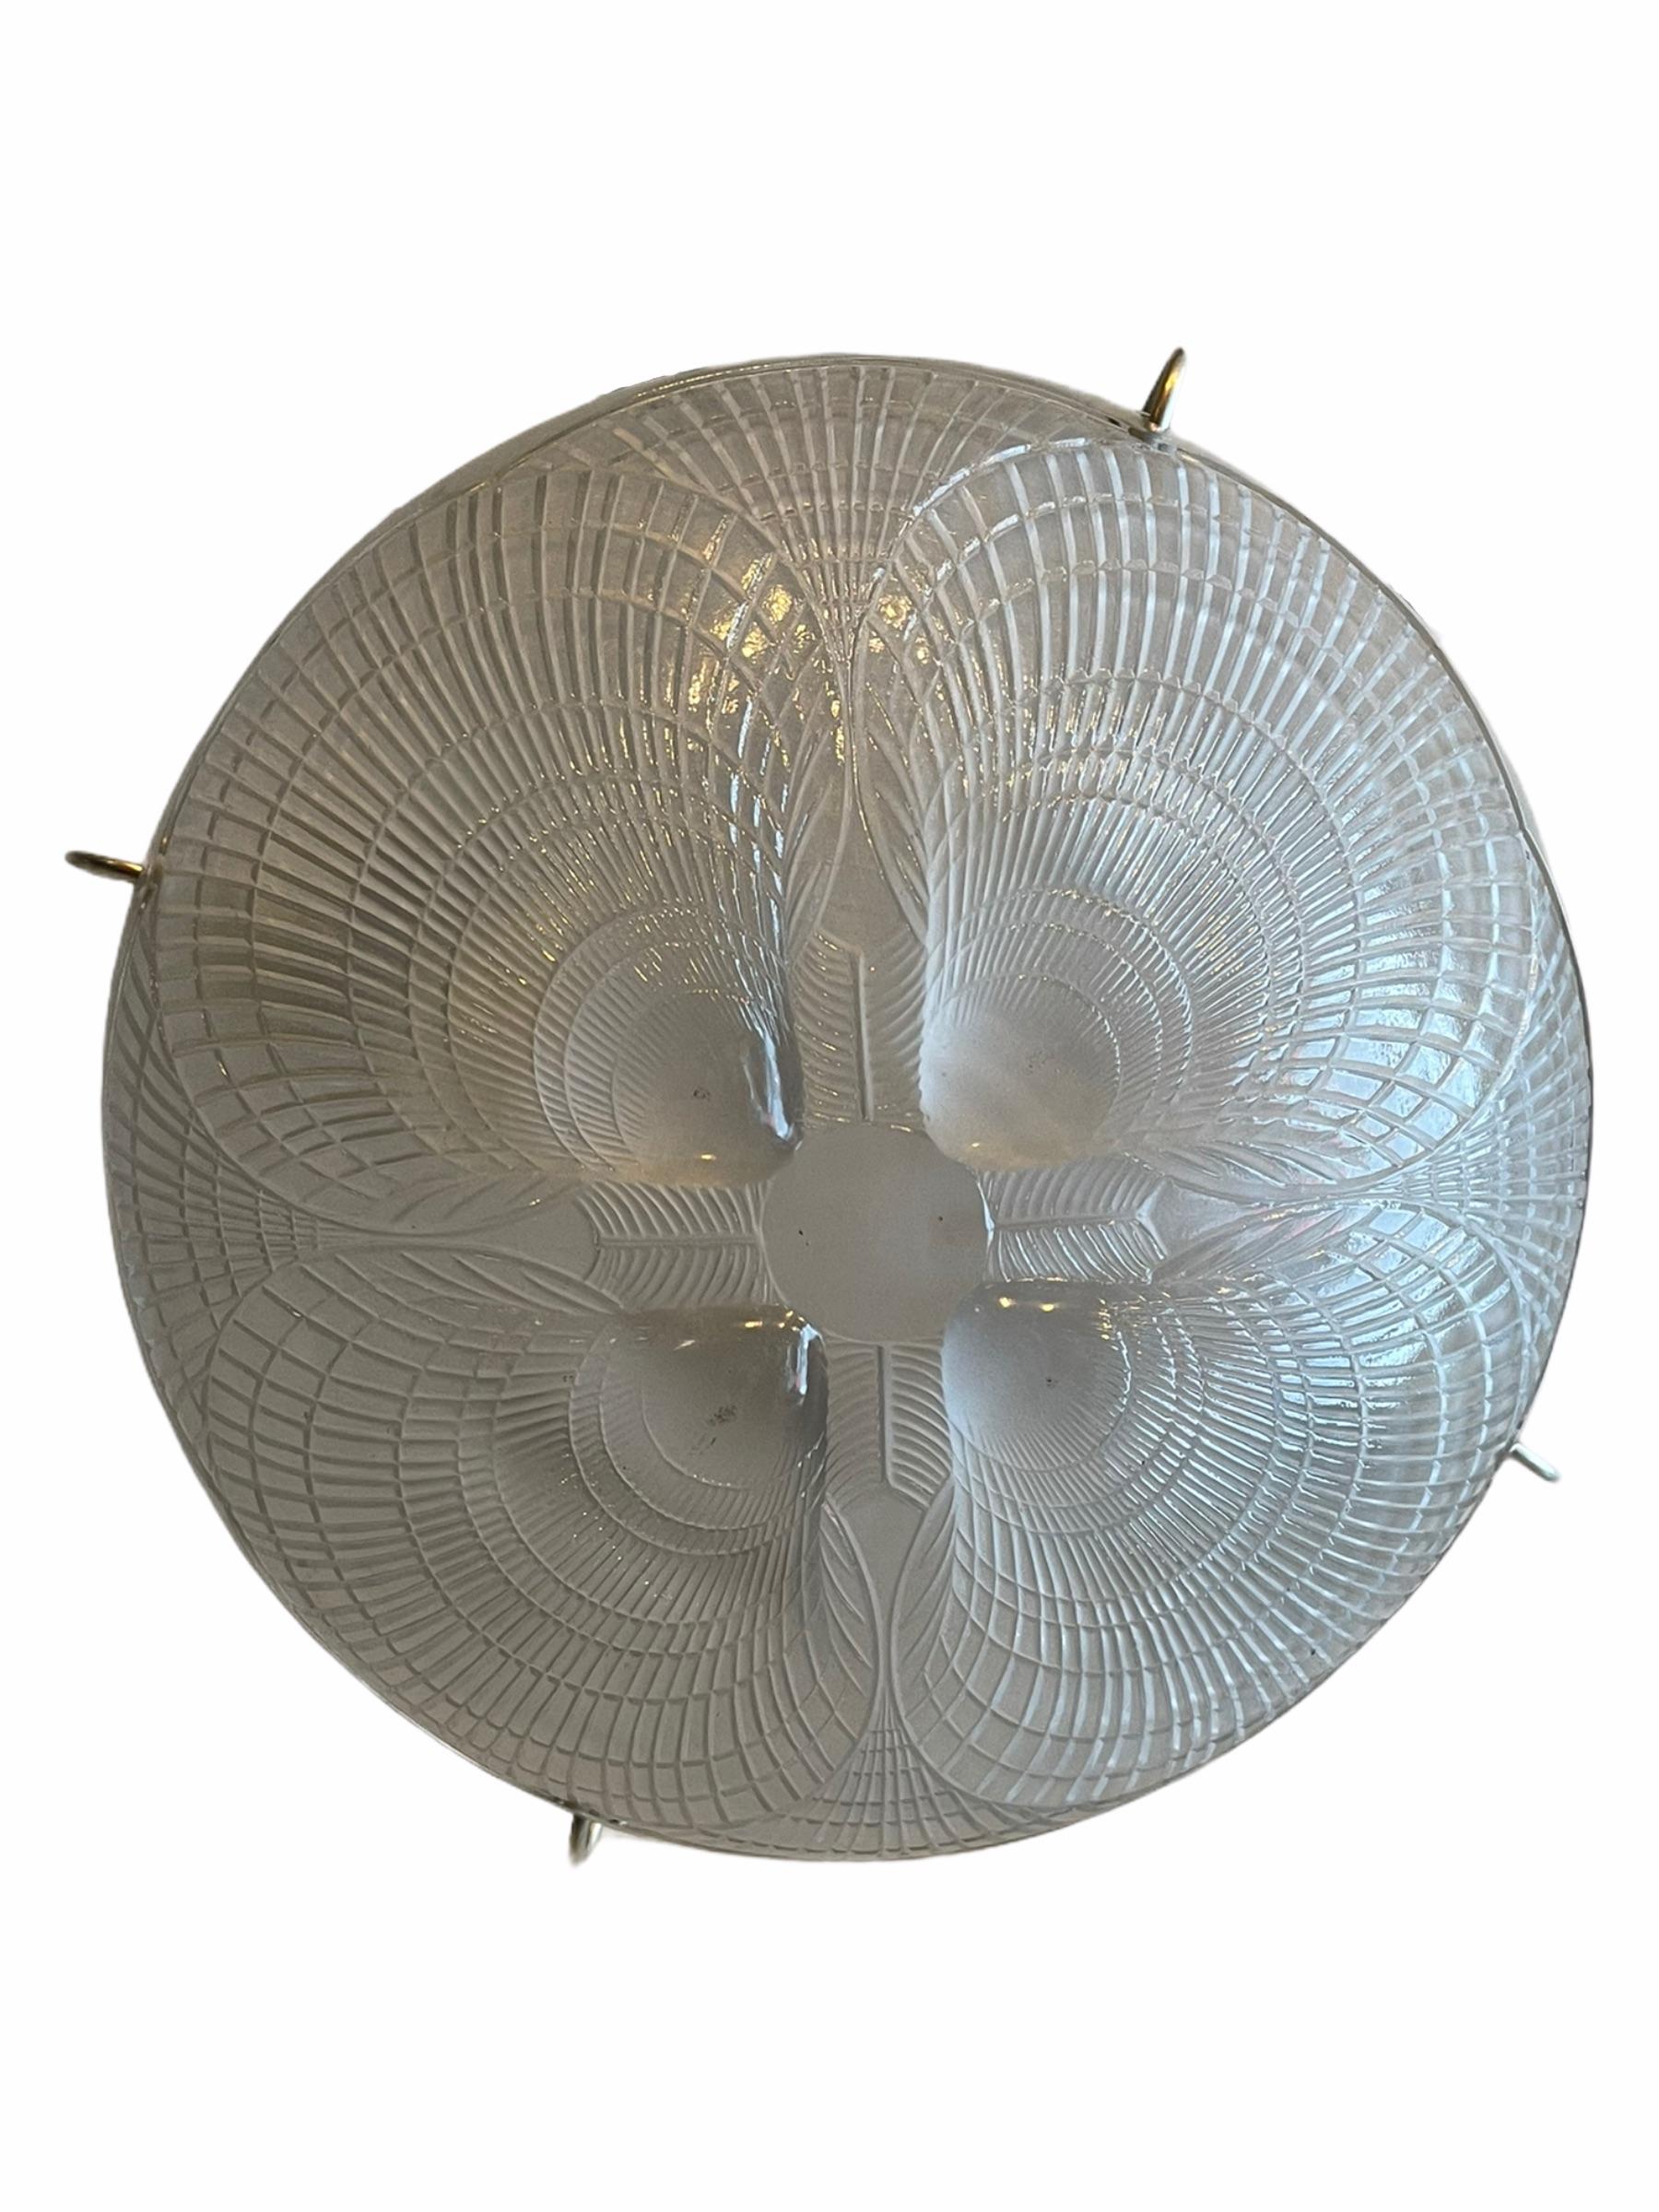 French 1921 René Lalique Pair of Coquilles Ceiling Lights Chandeliers Frosted Glass